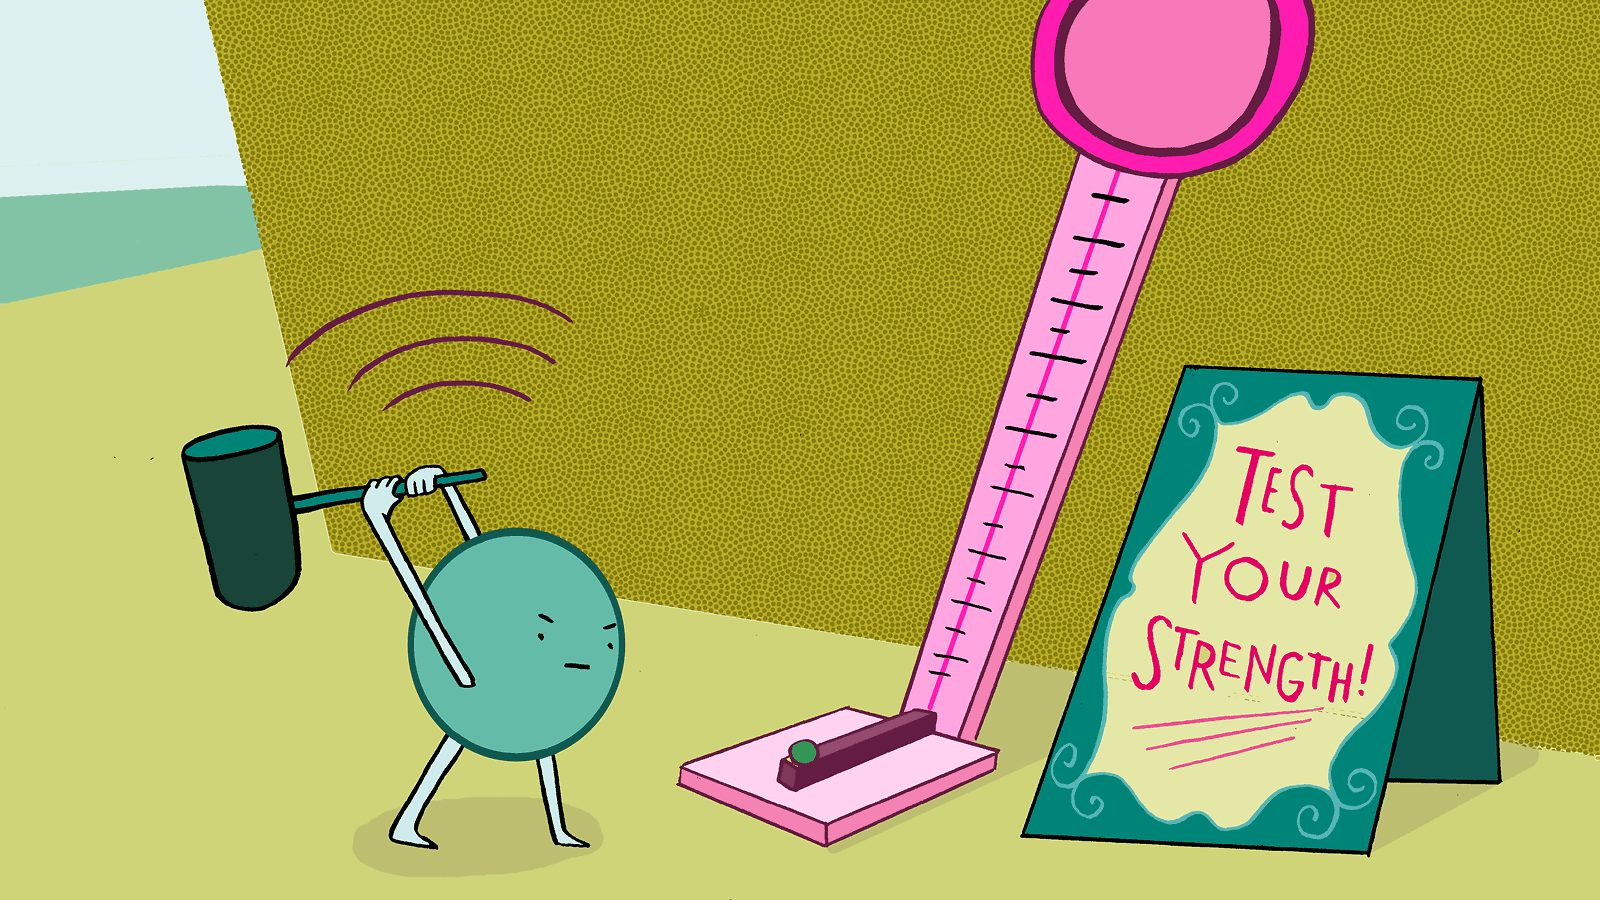 particle hitting a carnival strength test with mallet, sign "test your strength!"